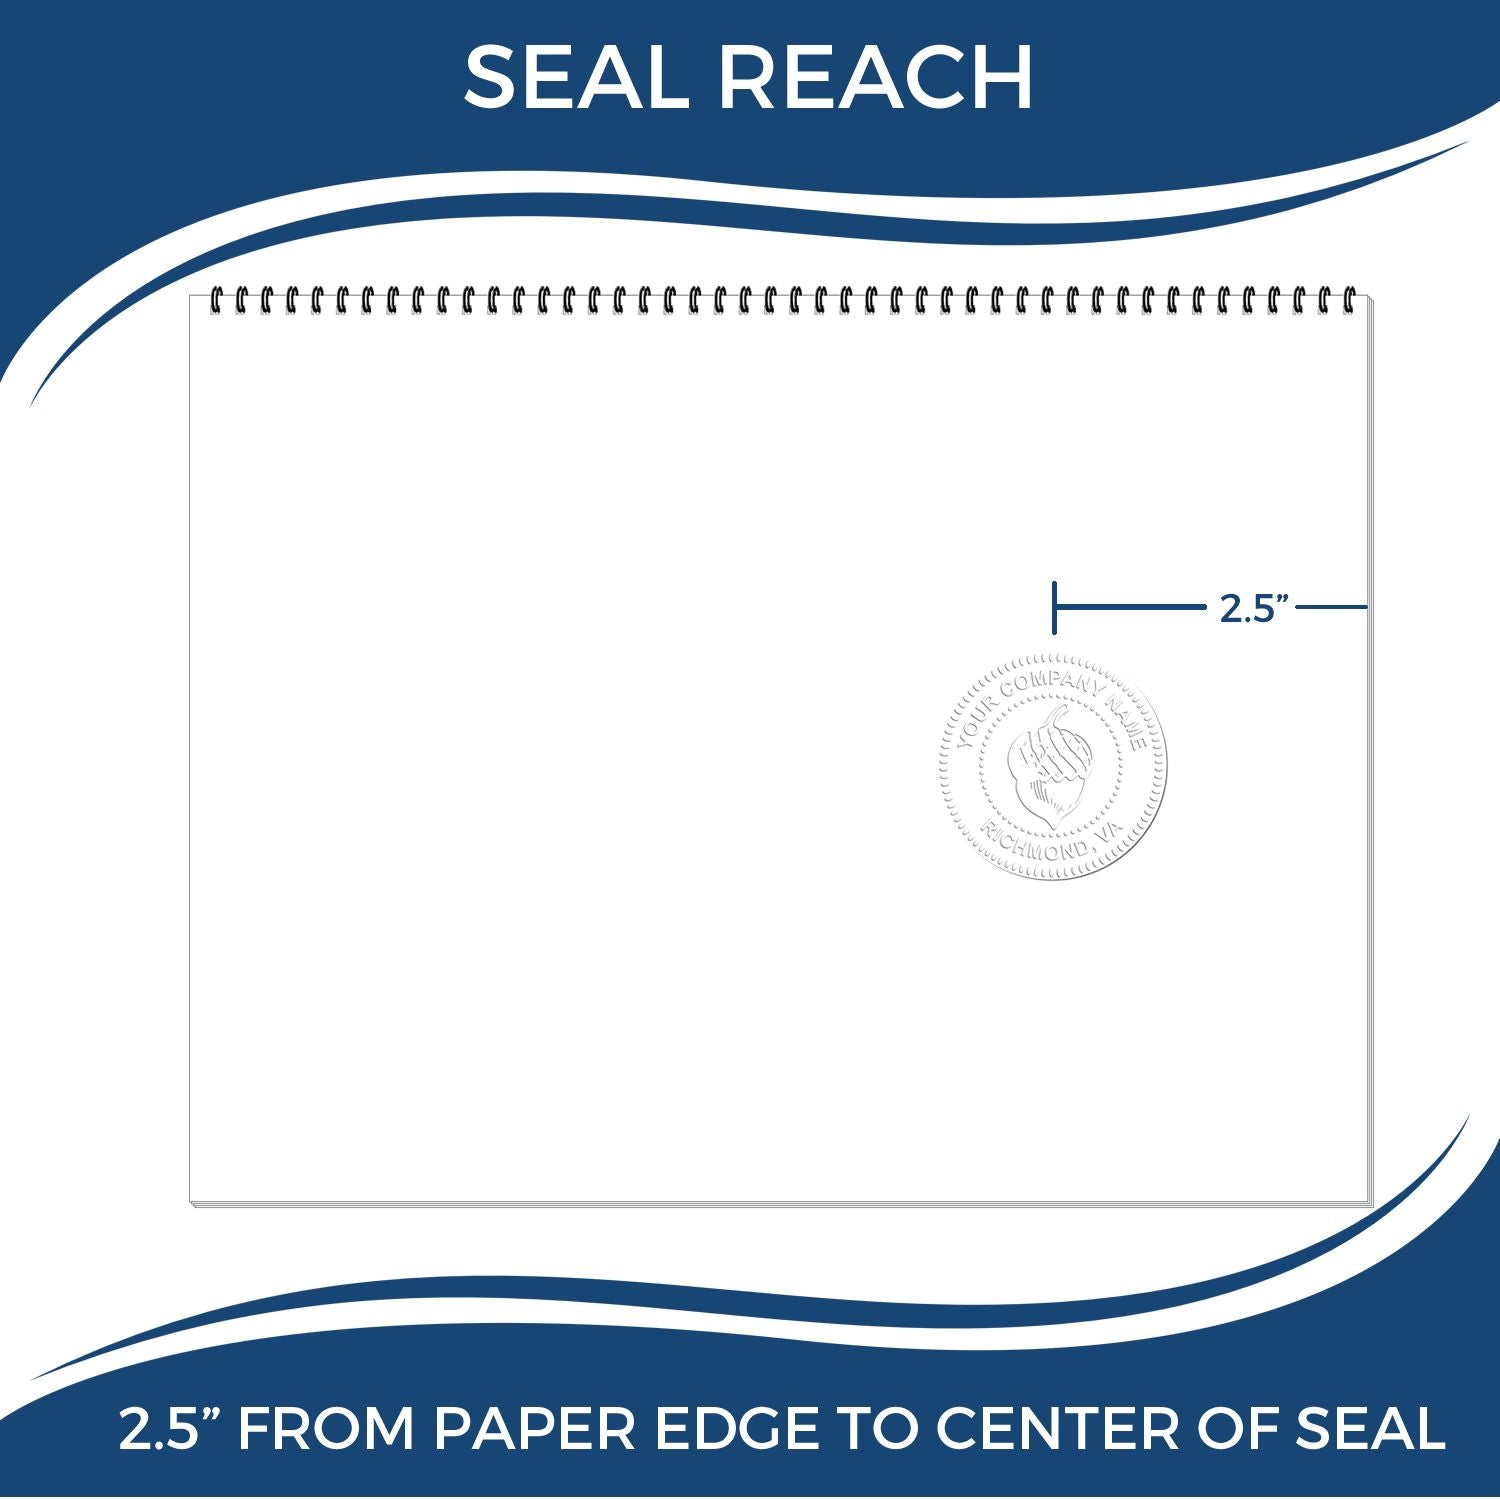 An infographic showing the seal reach which is represented by a ruler and a miniature seal image of the State of Delaware Long Reach Architectural Embossing Seal